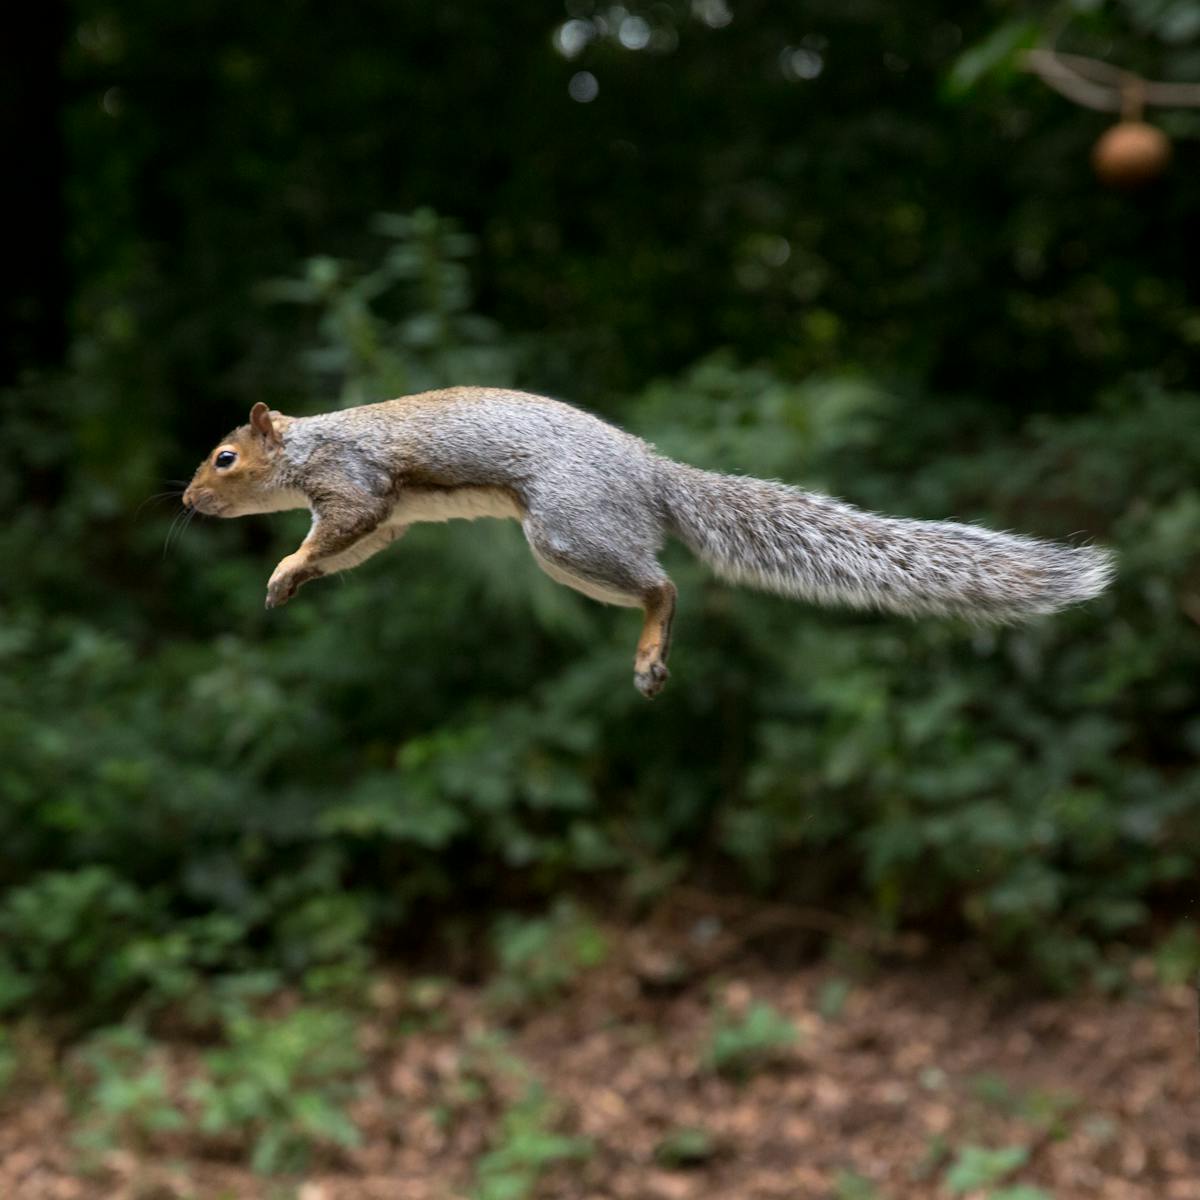 We used peanuts and a climbing wall to learn how squirrels judge their leaps  so successfully – and how their skills could inspire more nimble robots